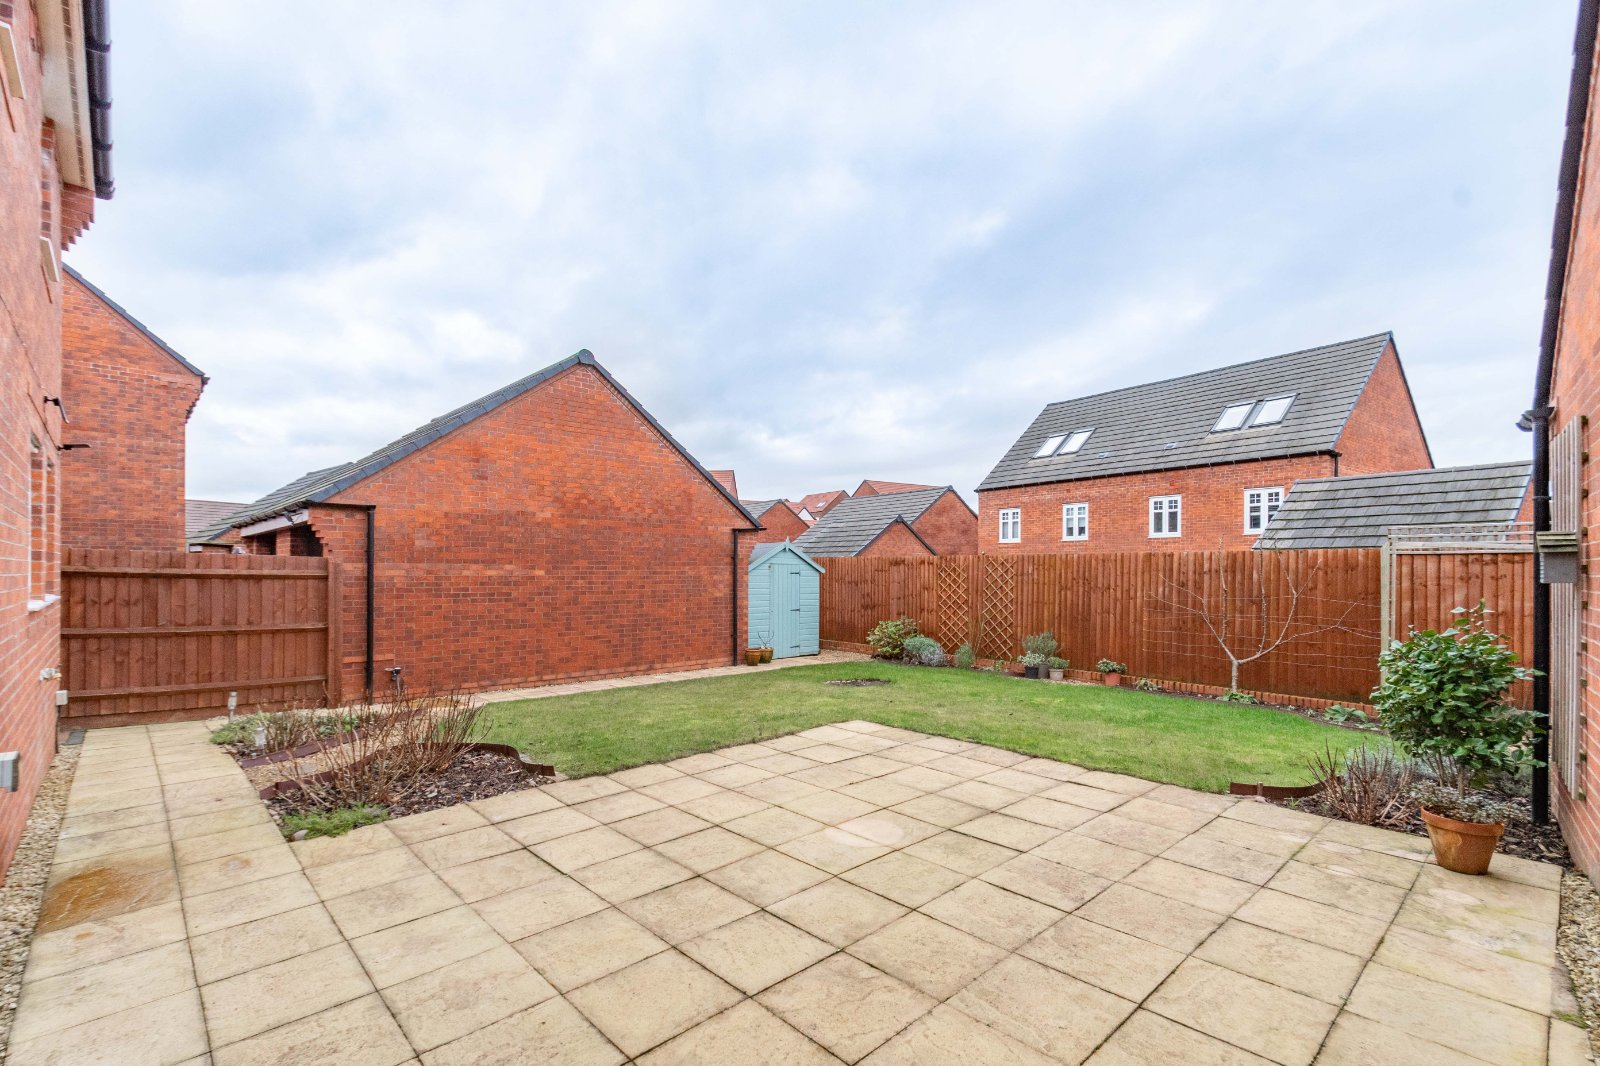 4 bed house for sale in Princethorpe Street, Bromsgrove  - Property Image 12